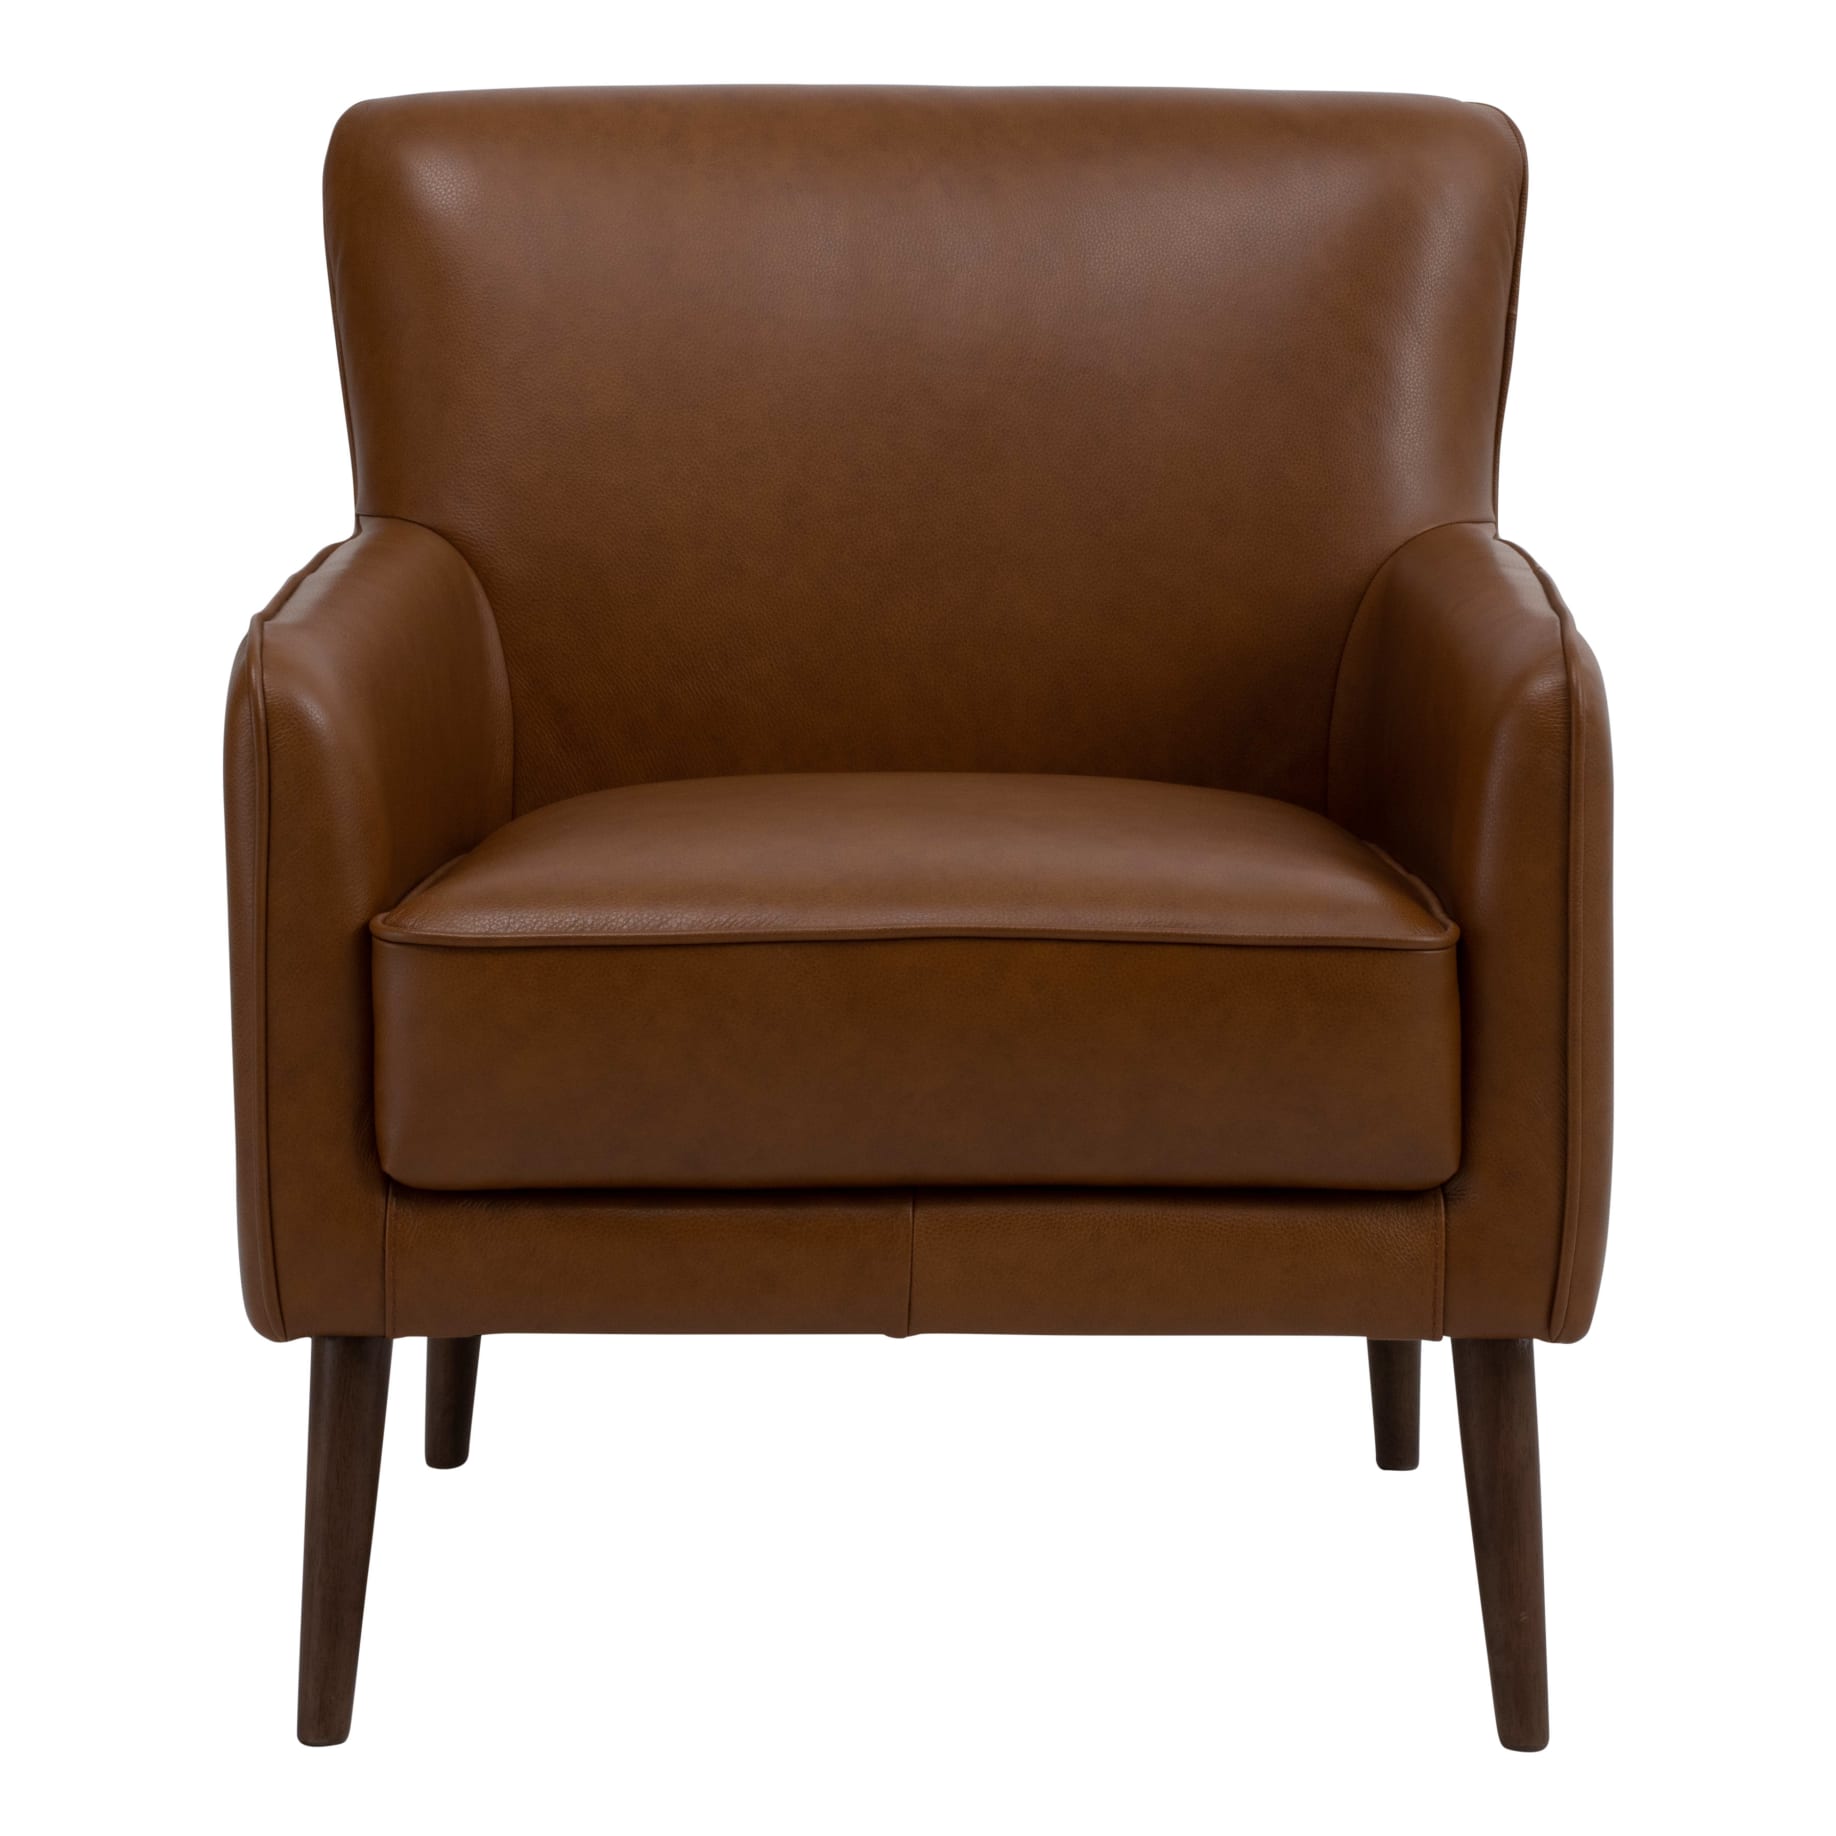 Rinella Designer Chair in Brown Leather